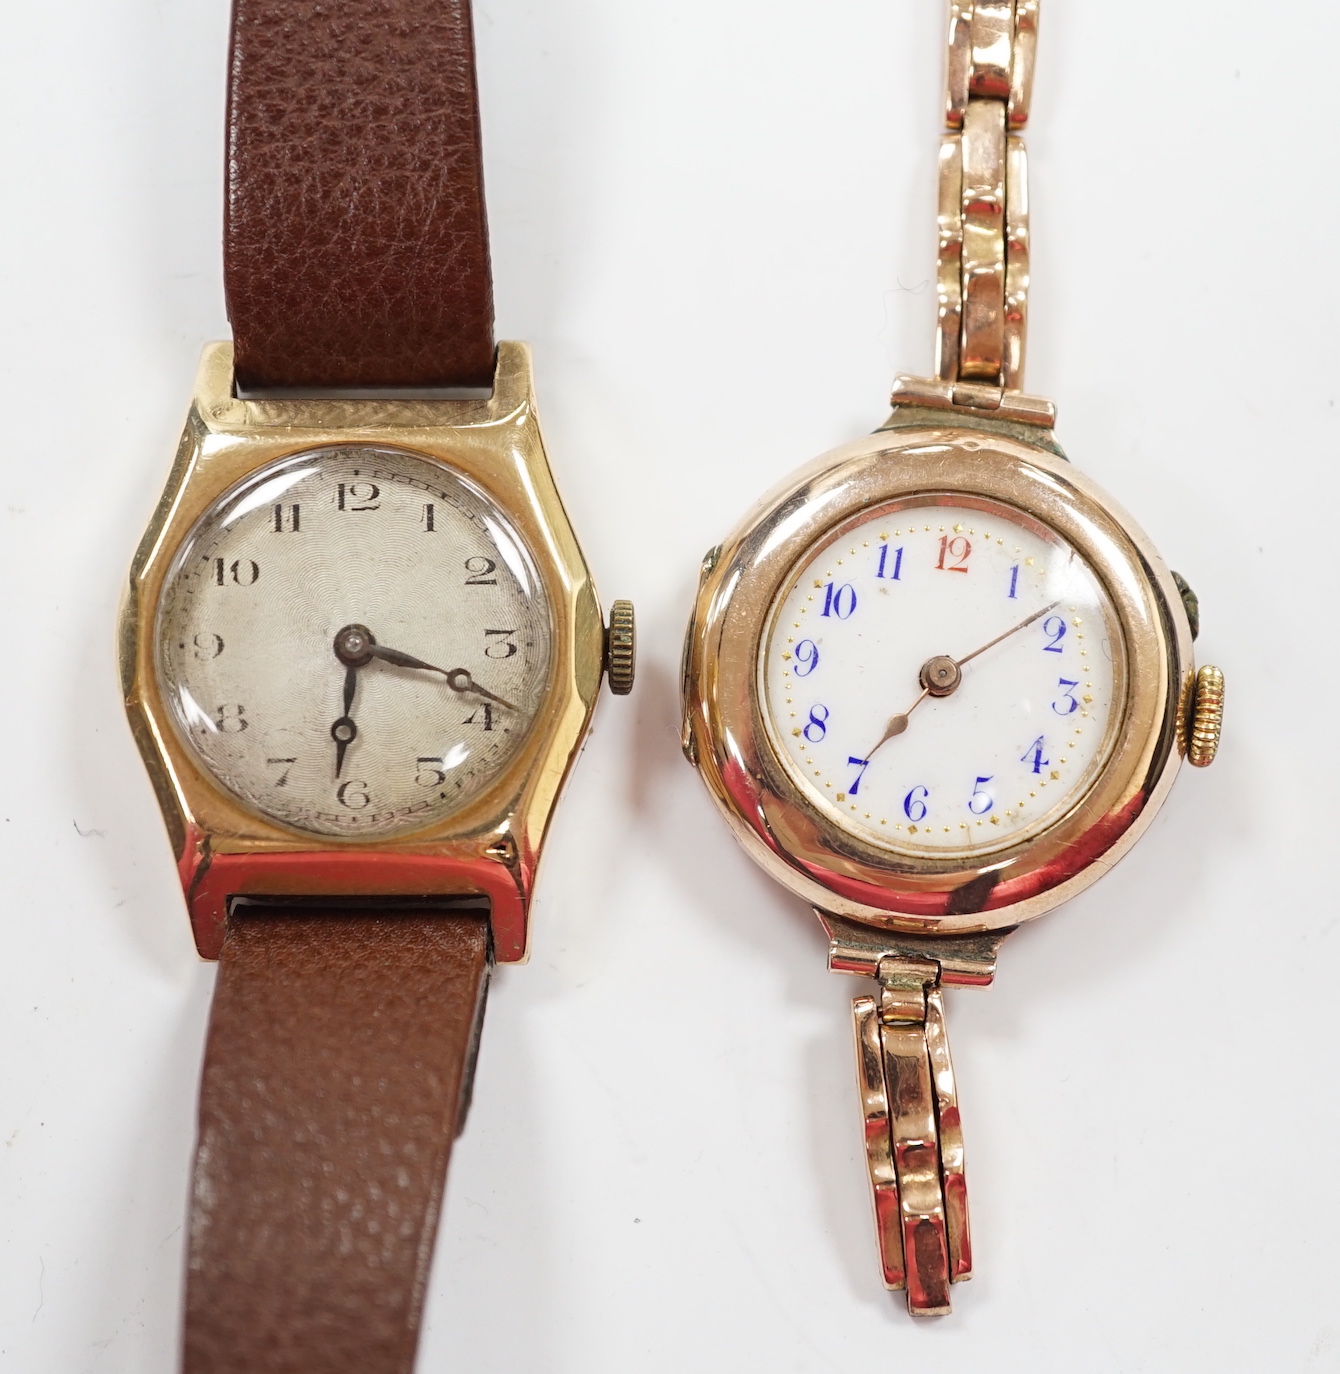 A lady's early 20th century 9k manual wind wrist watch, on an expanding 9ct bracelet(a.f.), together with a lady's 1930's 9ct Tavanne manual wind wrist watch, on a leather strap.